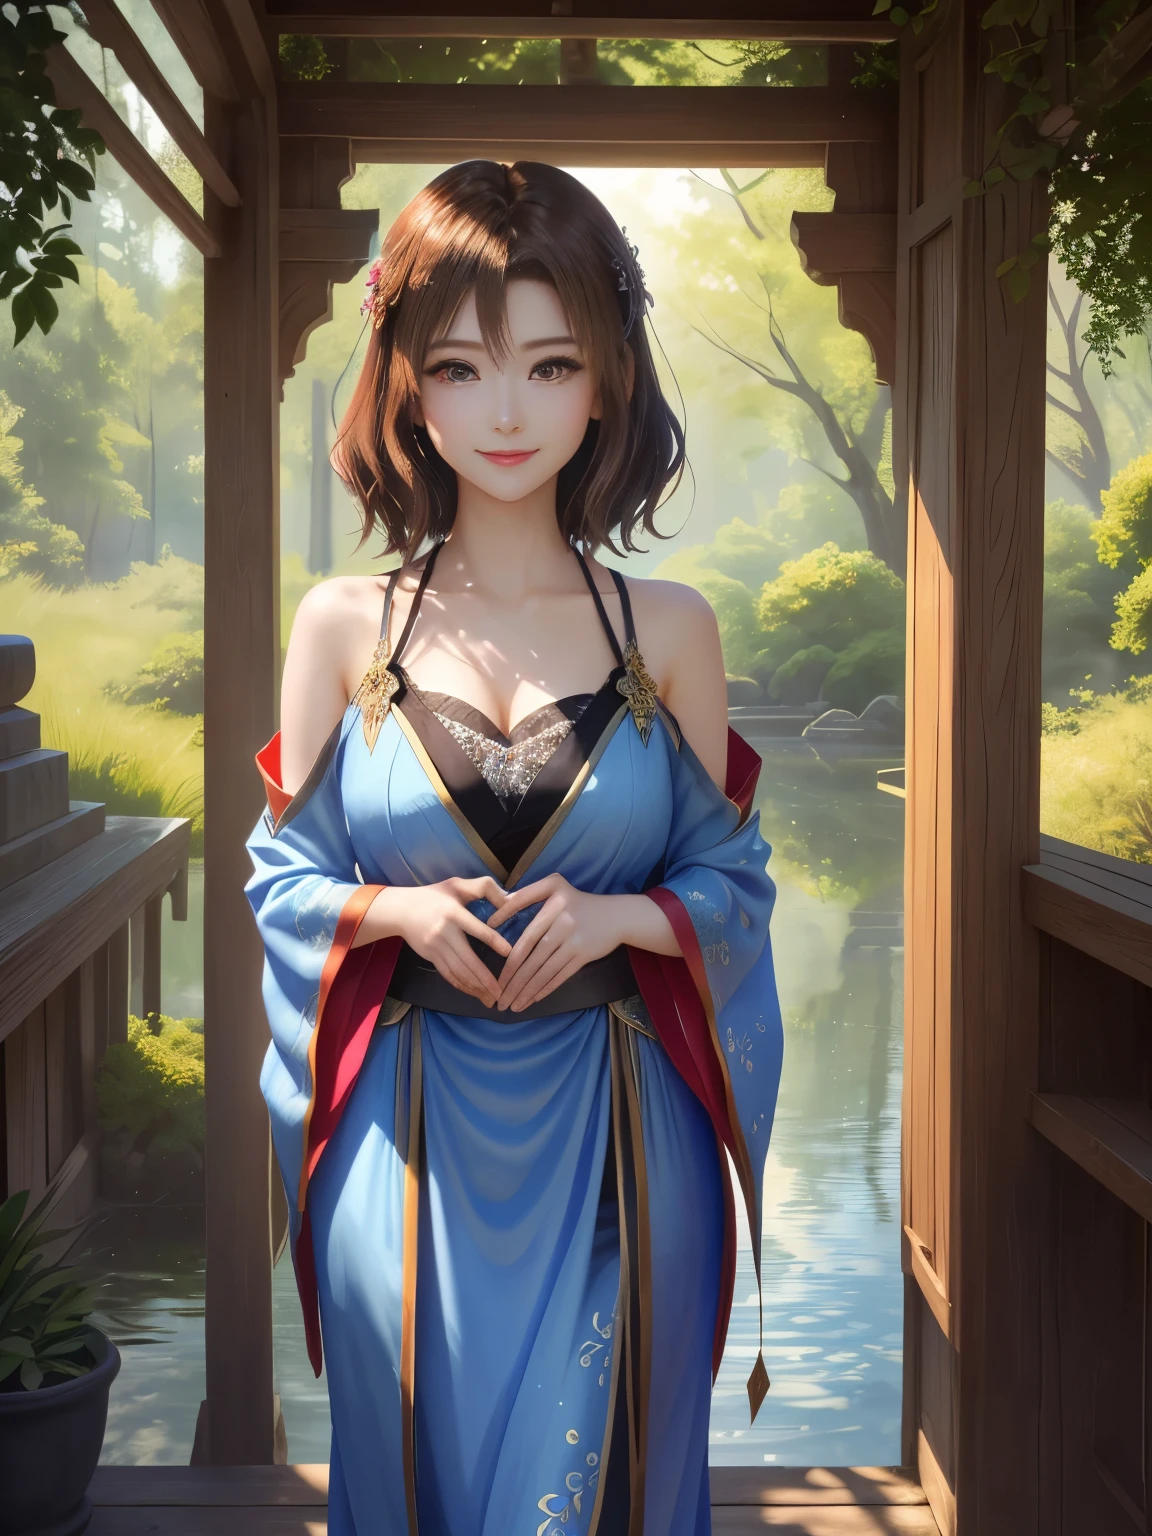 masterpiece , best quality,smile,smile,Small face,Exposed shoulders,golden kimono,A little cleavage exposure,Double Eyes,Beauty,Beauty,beautiful girl,Stand firmly on both feet,Charm,Adult,lure,Big eyes,Light brown hair,Mysterious World,Water God殿,in the forest,Water God,Mythical God,Light blue mysterious atmosphere,Water sources surround the area,Light blue Mysterious background,Gorgeously curled hair,Slim figure,Brown eyes,Faithfully reproduced contrast,Short Hair,Beautiful short hair,Berry Short,Short Hair,Just One,Precision quality,A faithful reproduction of the human eye,Light blue mysterious atmosphere,Light blue Mysterious background,Beautiful details, colorful, Subtle details, Delicate lips, Intricate details, Genuine, ultrargenuineista, Mature, Wide-open eyes, raposa de Beautiful digital art,Shrine maiden,Exquisite digital illustration, mizutsune,Pixiv Digital Art, Shining Light, High Contrast, Mysterious,Take center,View your viewers